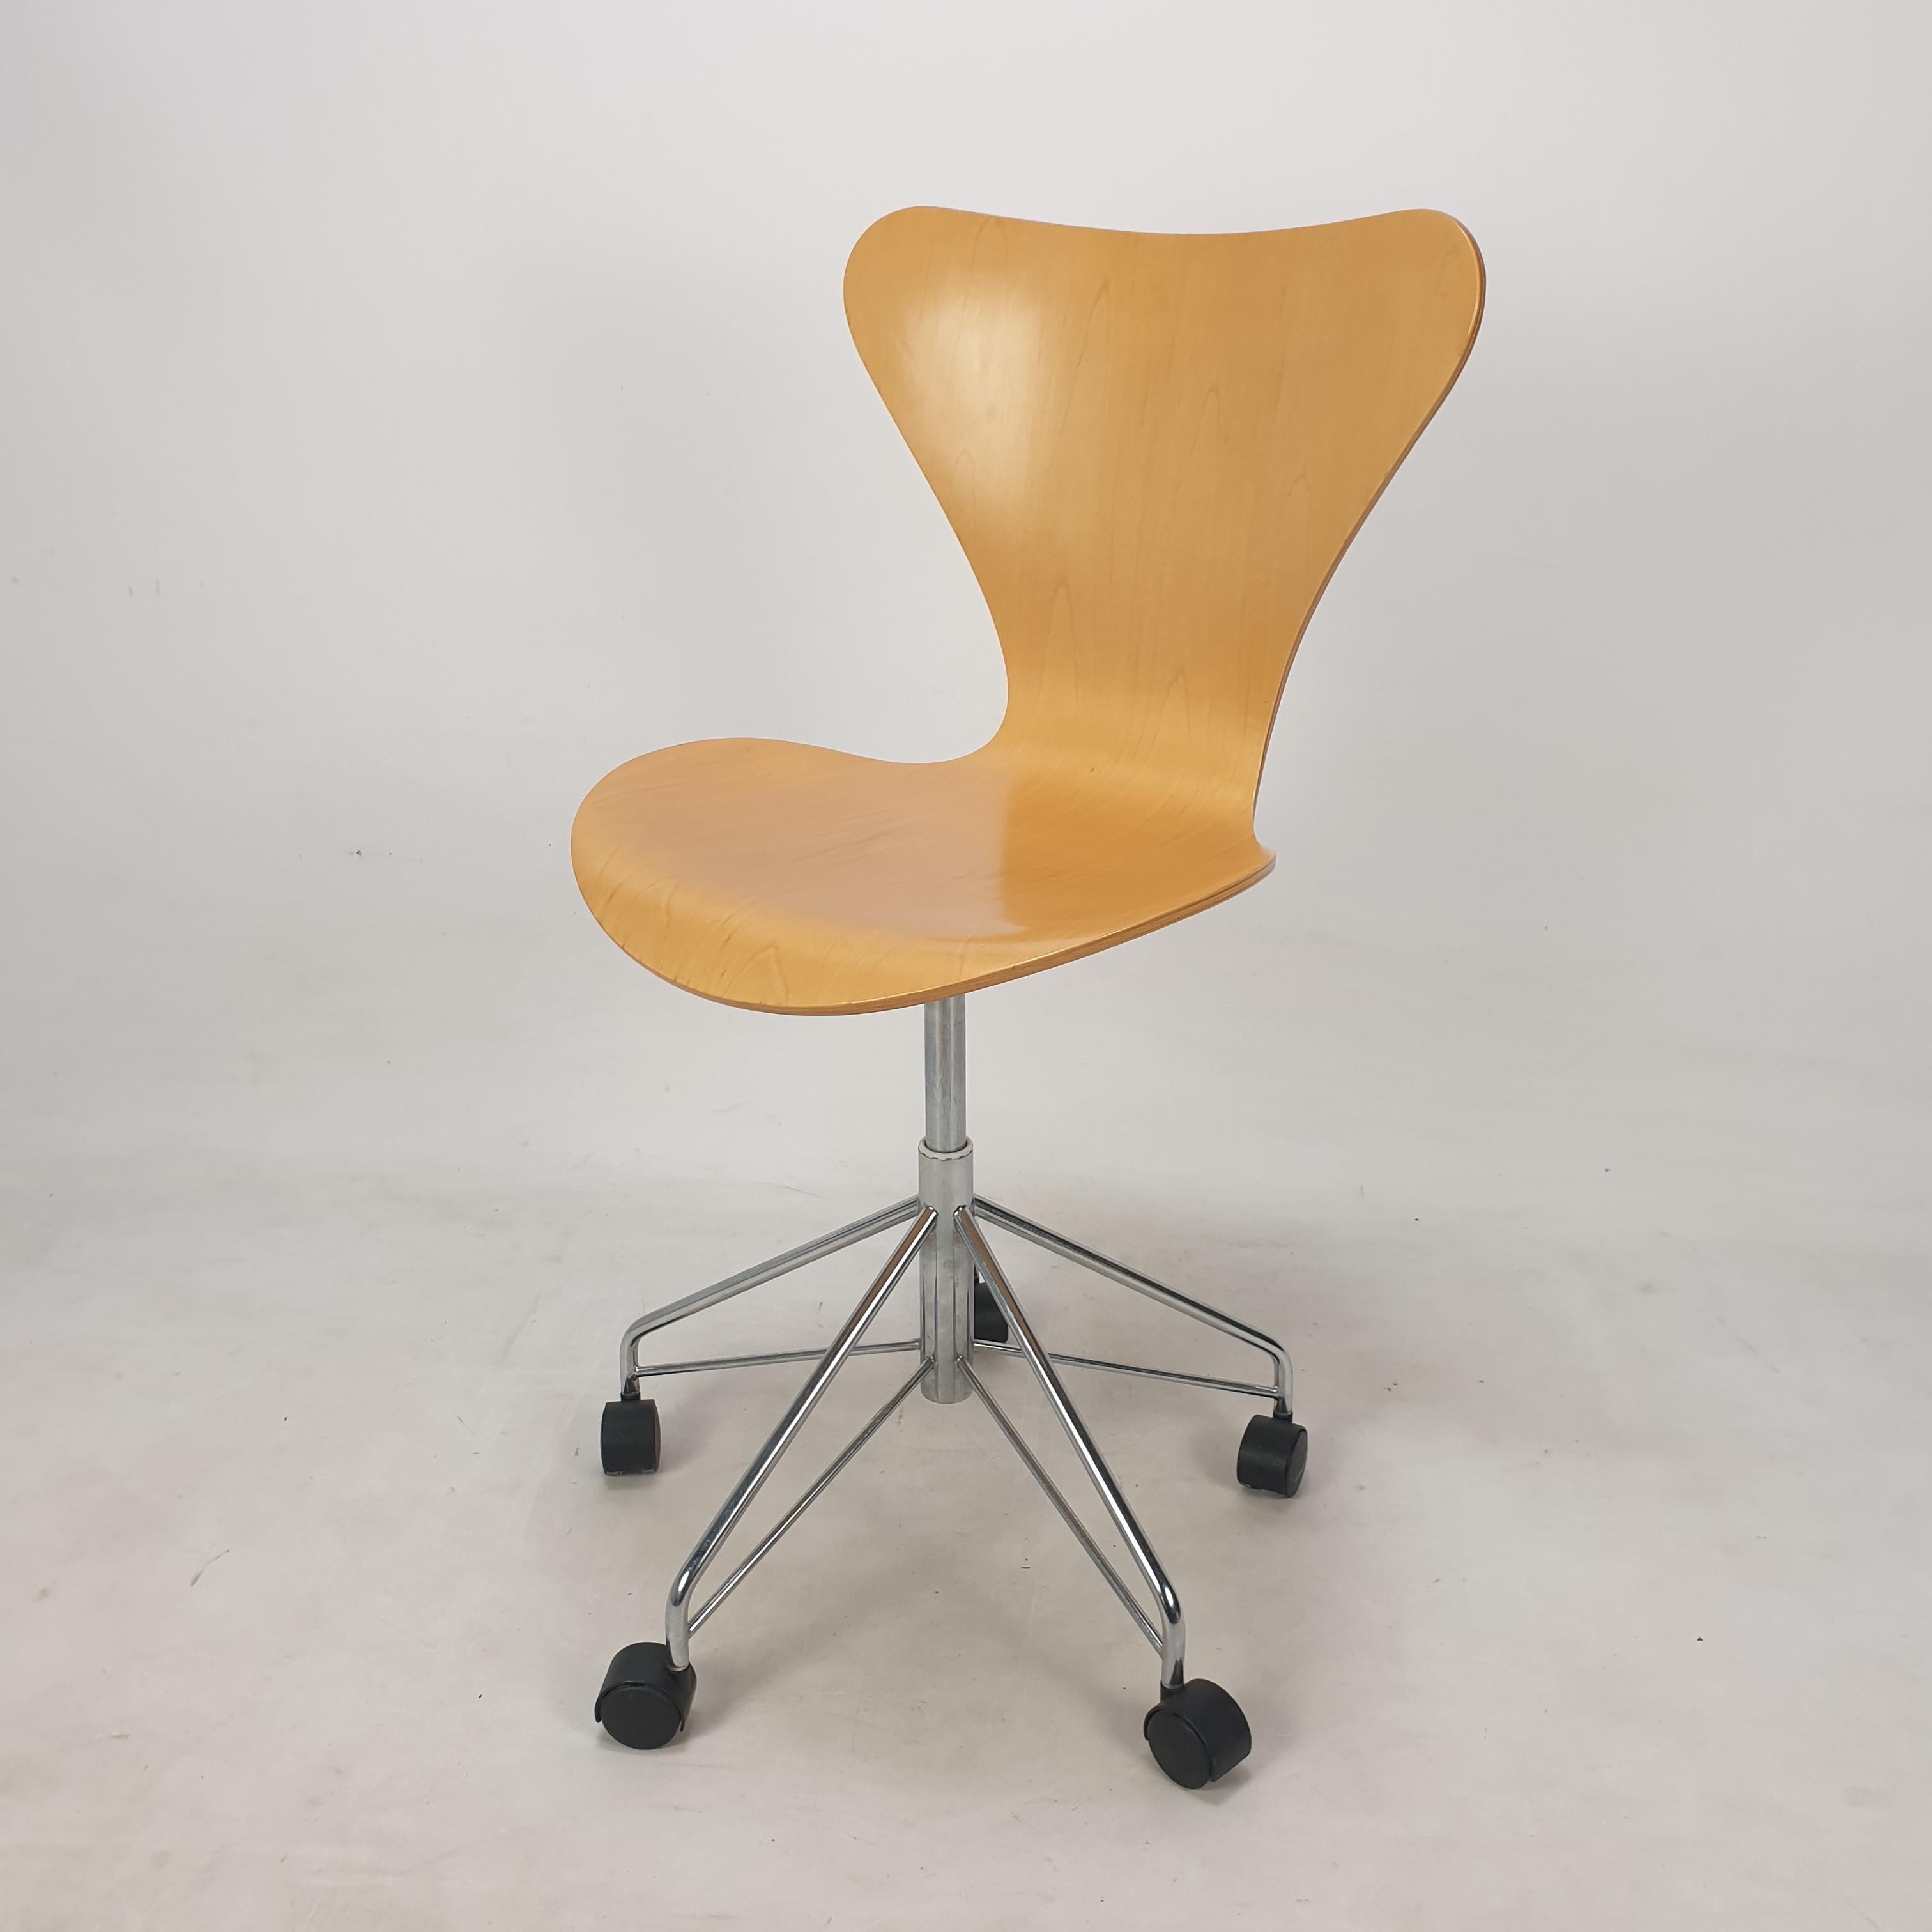 Series 7 chair is an icon of modern furniture history, designed by Arne Jacobsen in 1955.
Its unique shape is timeless and incredibly versatile, showing character without overwhelming the eye.

The chair is made of several layers of